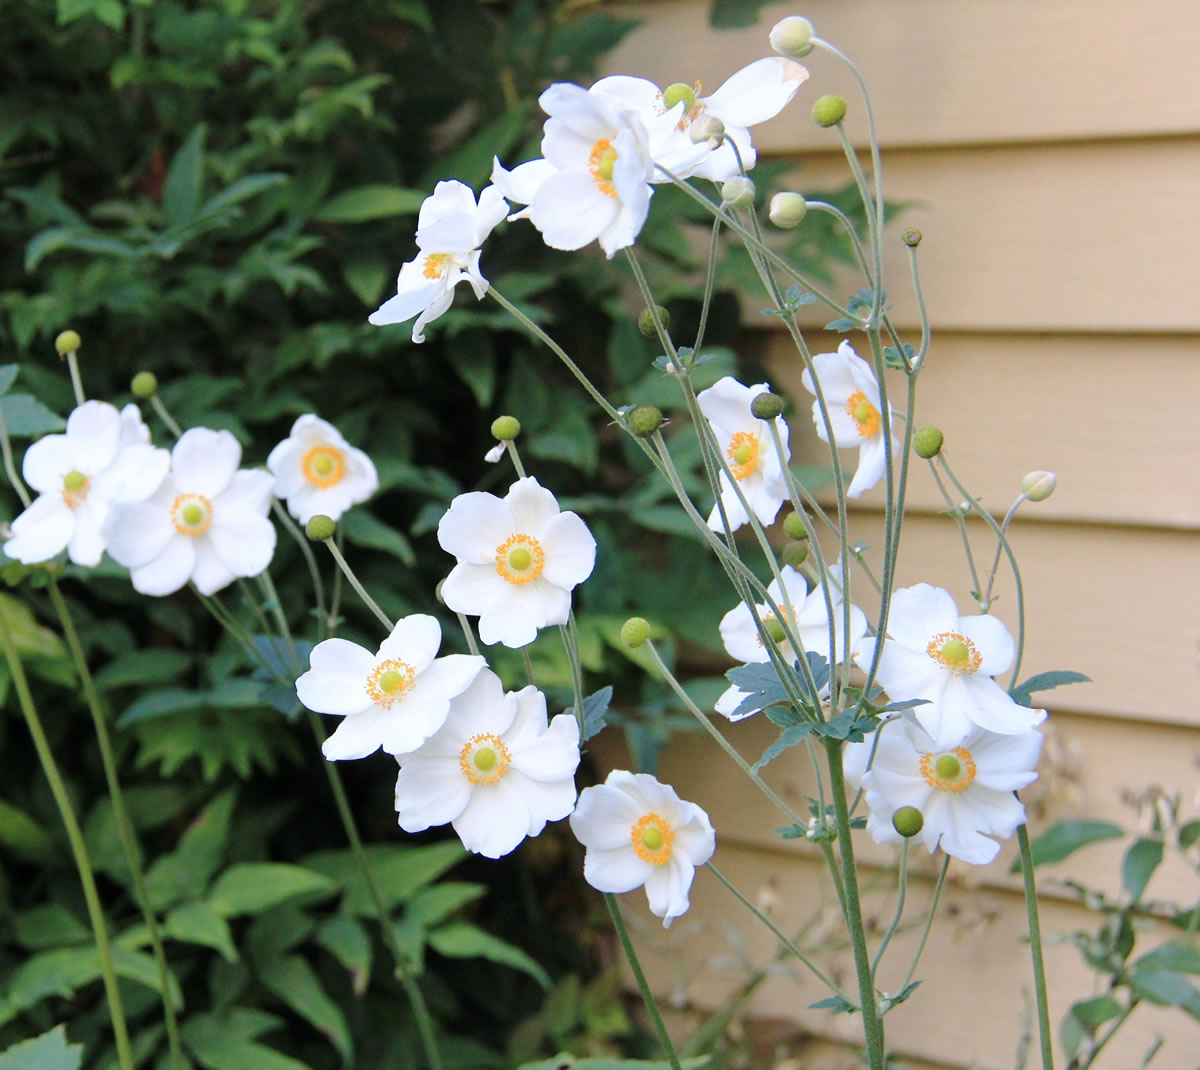 Rob Rosser
Japanese anemones add a distinct note of grace and charm to late-season borders.